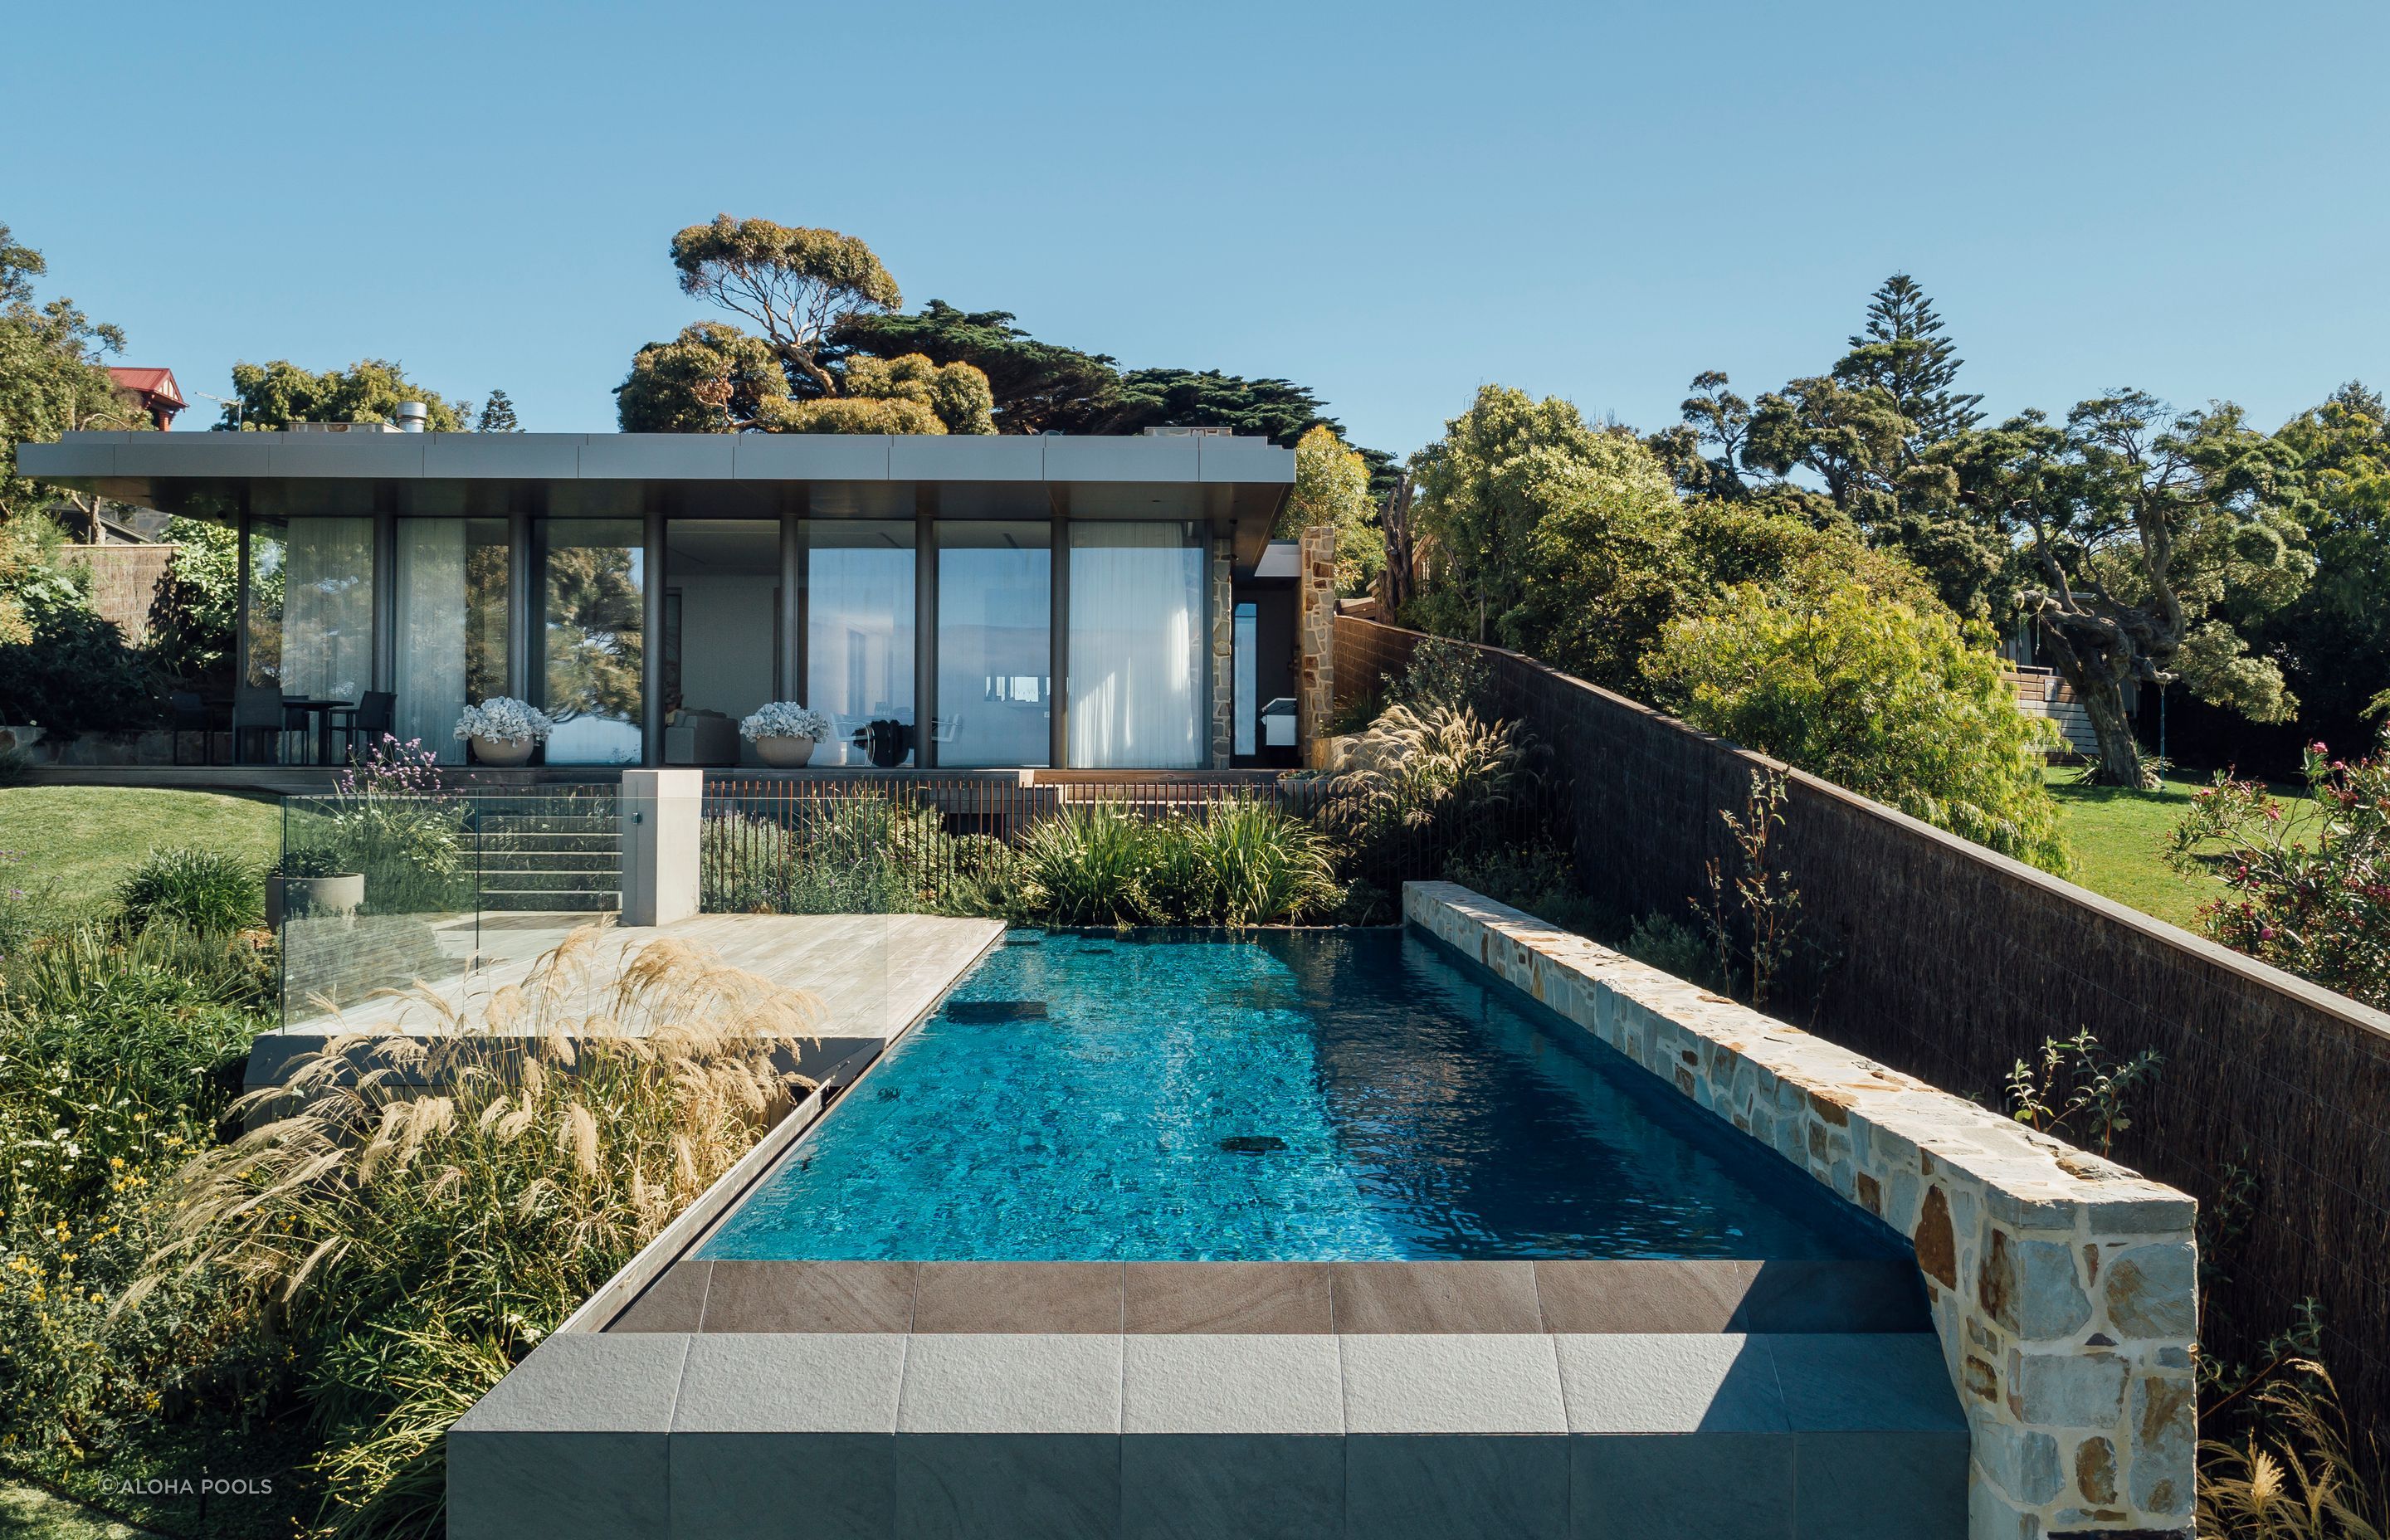 Ornamental grass on the pools left hand side provides a nice contrast with the stone boundary wall on the right. adding this pools visual appeal. Featured project: Erskine - Aloha Pools